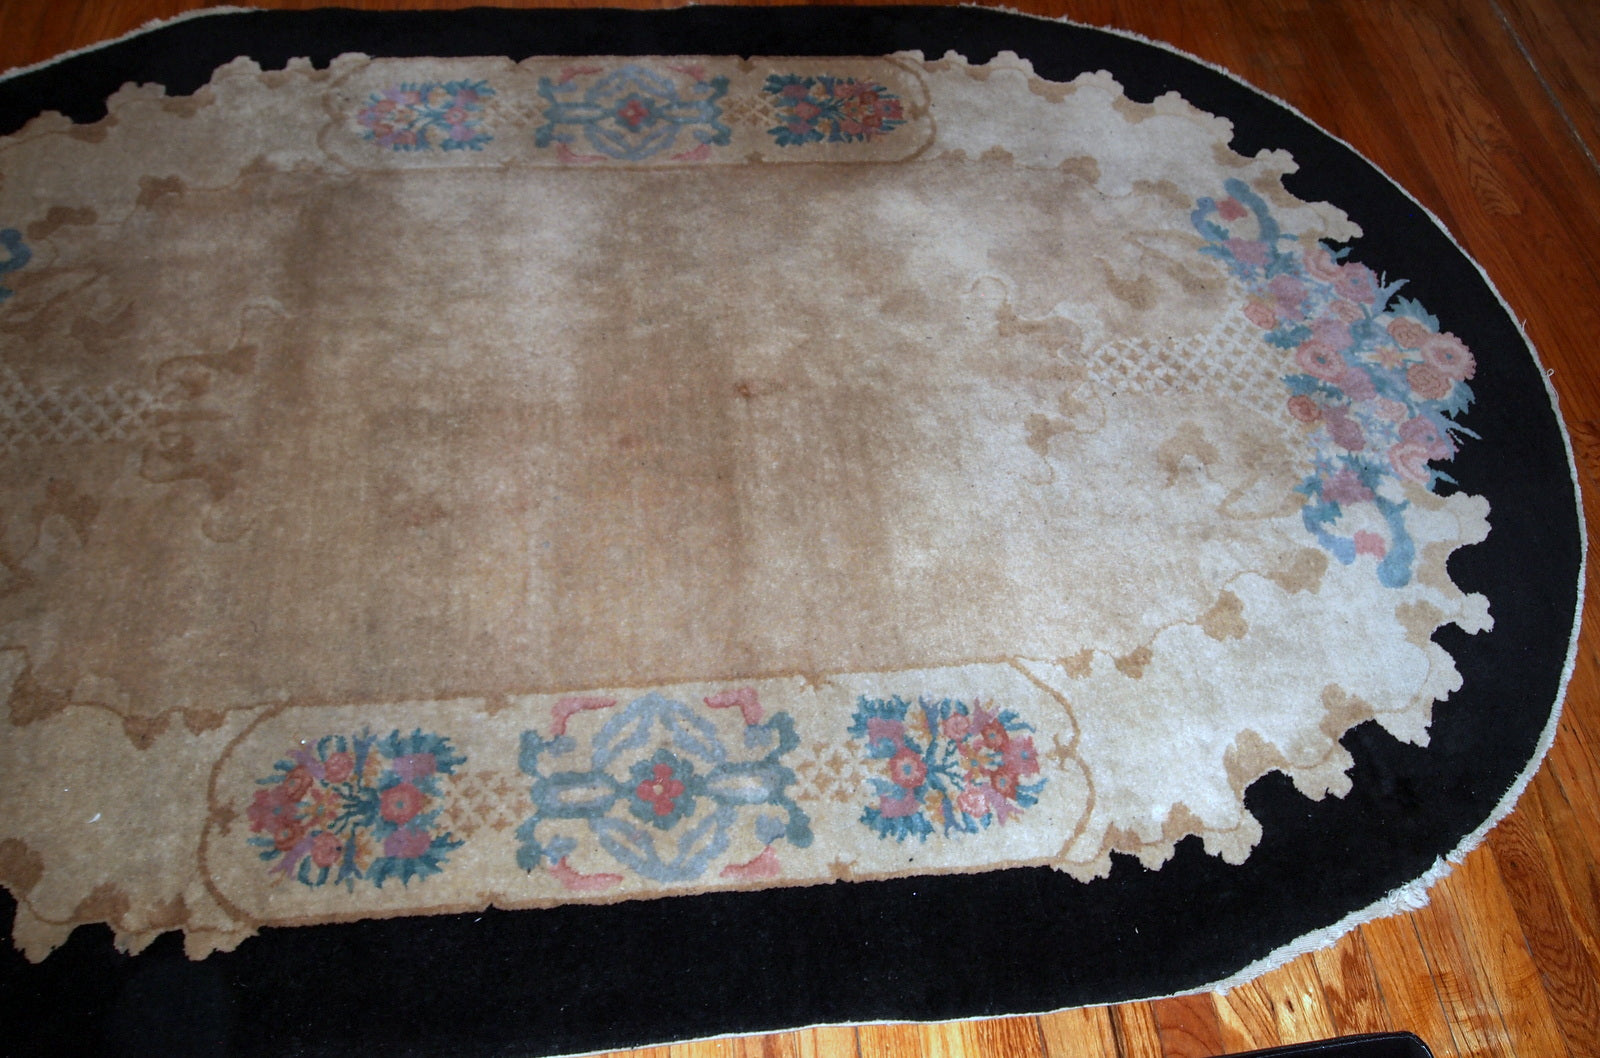 Handmade antique oval Art Deco Chinese rug in light brown shade with black border. The rug is in original good condition.